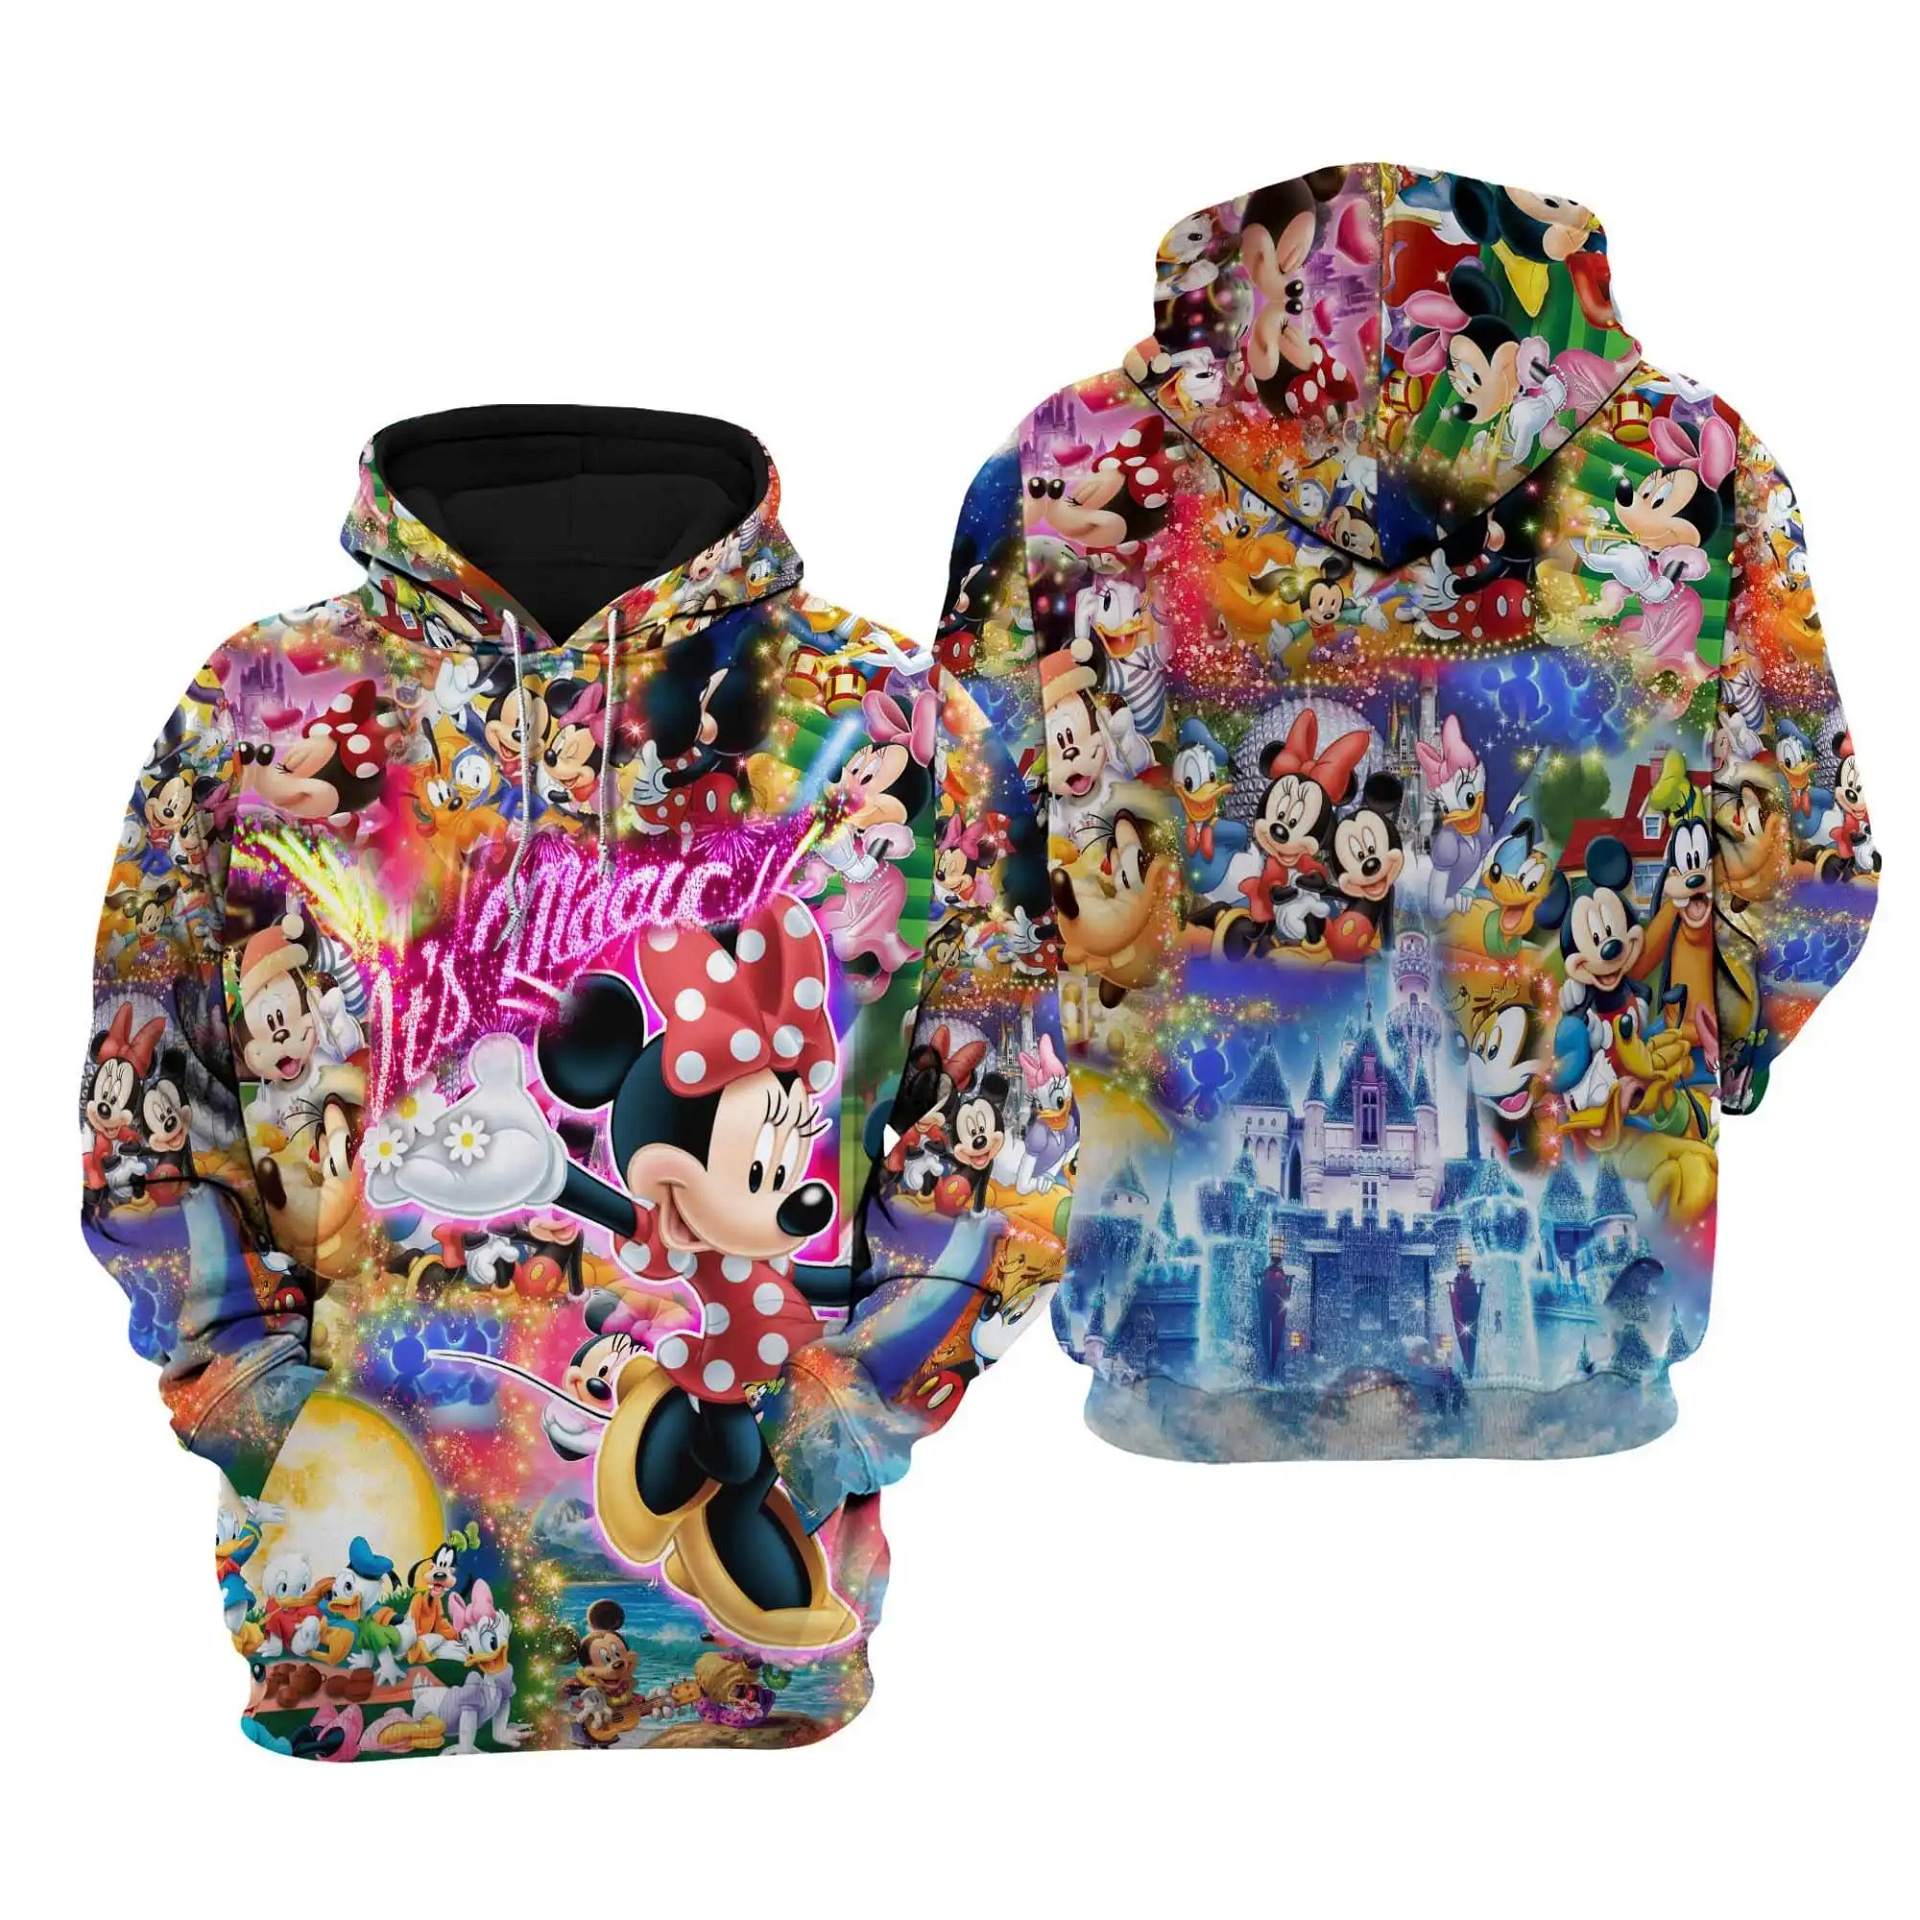 Minnie Mouse Magical Glitter Castle Disney Cartoon Graphic Outfits Clothing Men Women Kids Toddlers Hoodie 3D